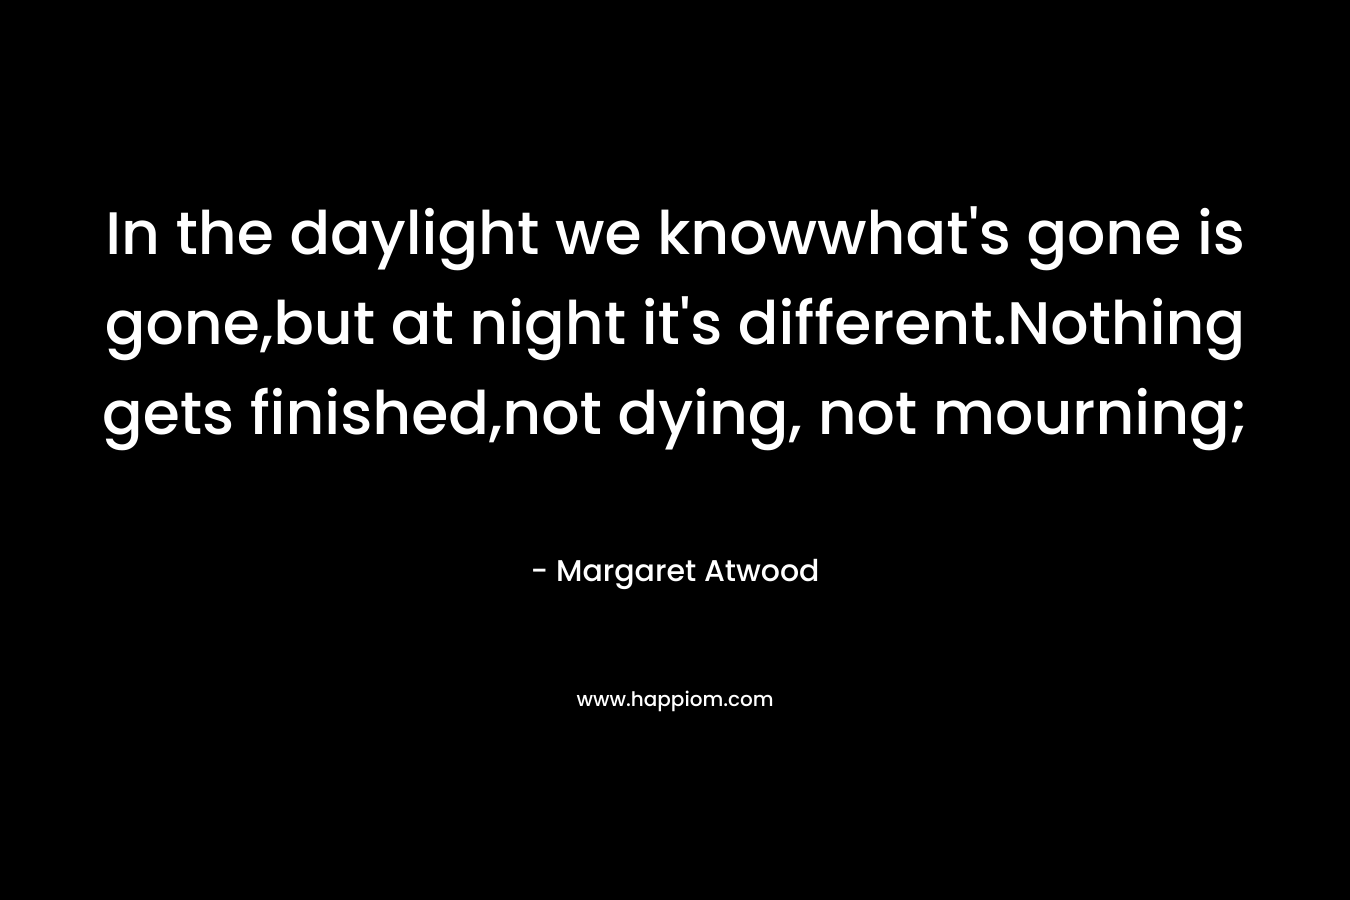 In the daylight we knowwhat's gone is gone,but at night it's different.Nothing gets finished,not dying, not mourning;